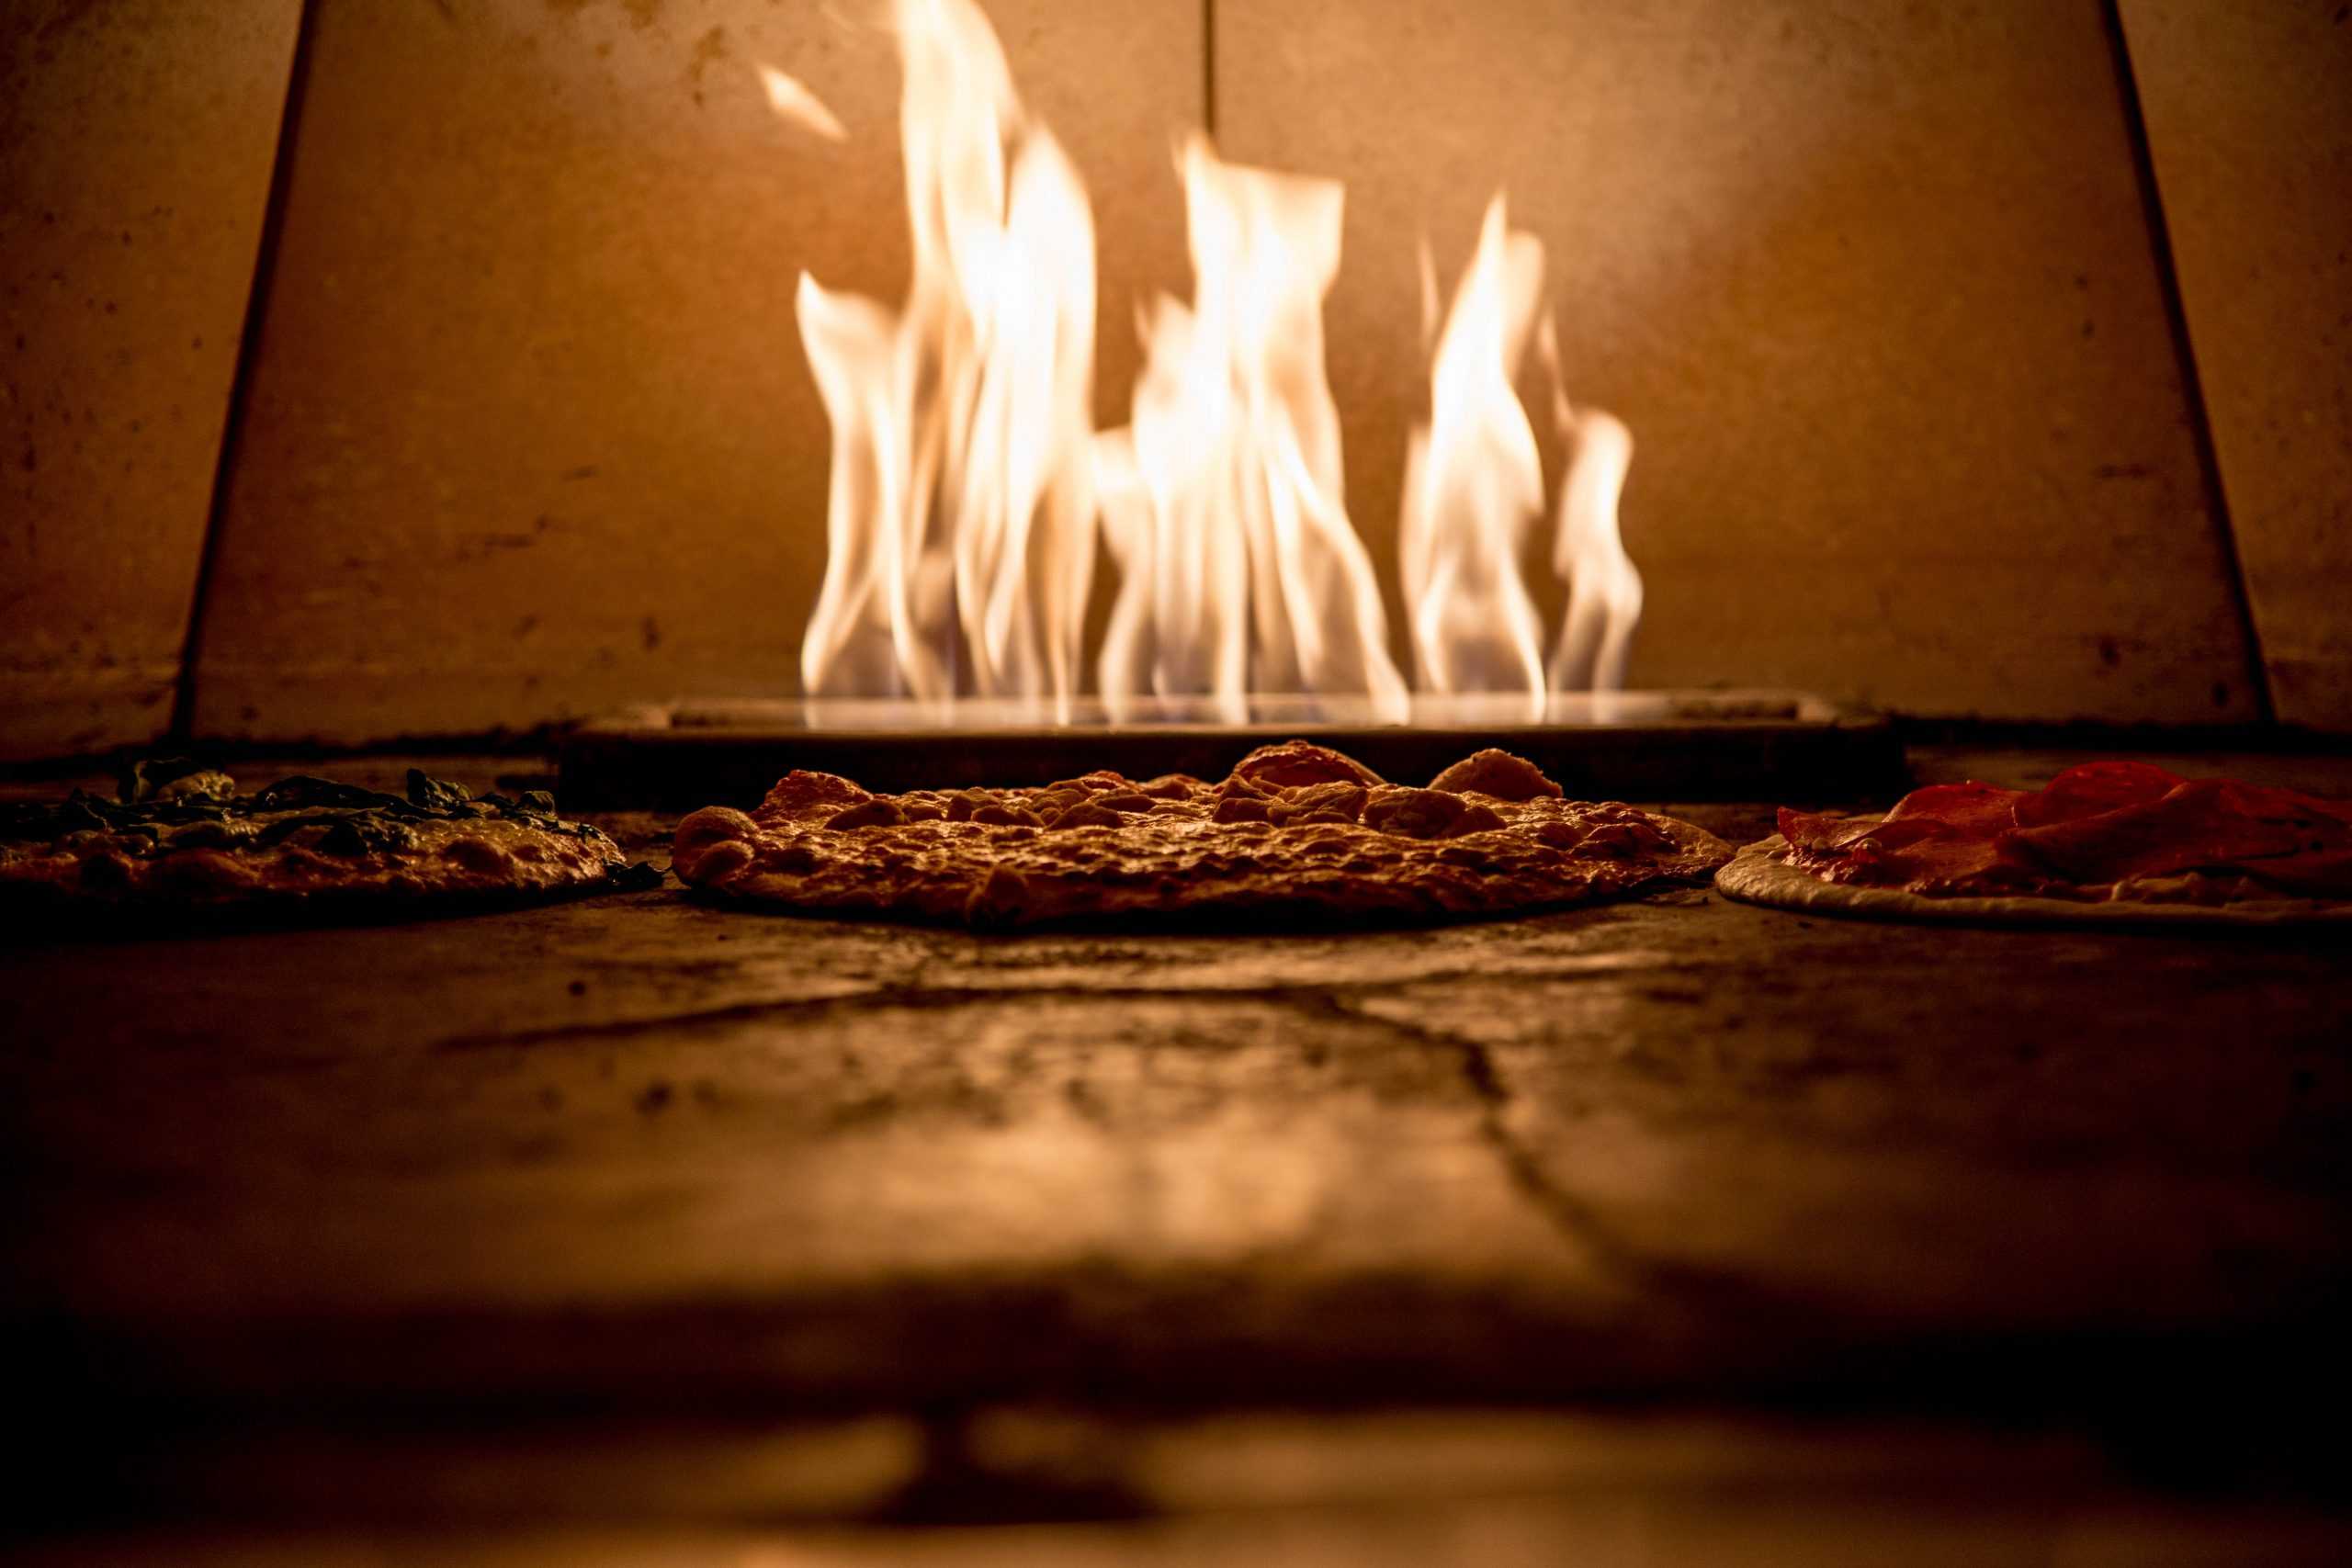 fire in an oven cooking pizza